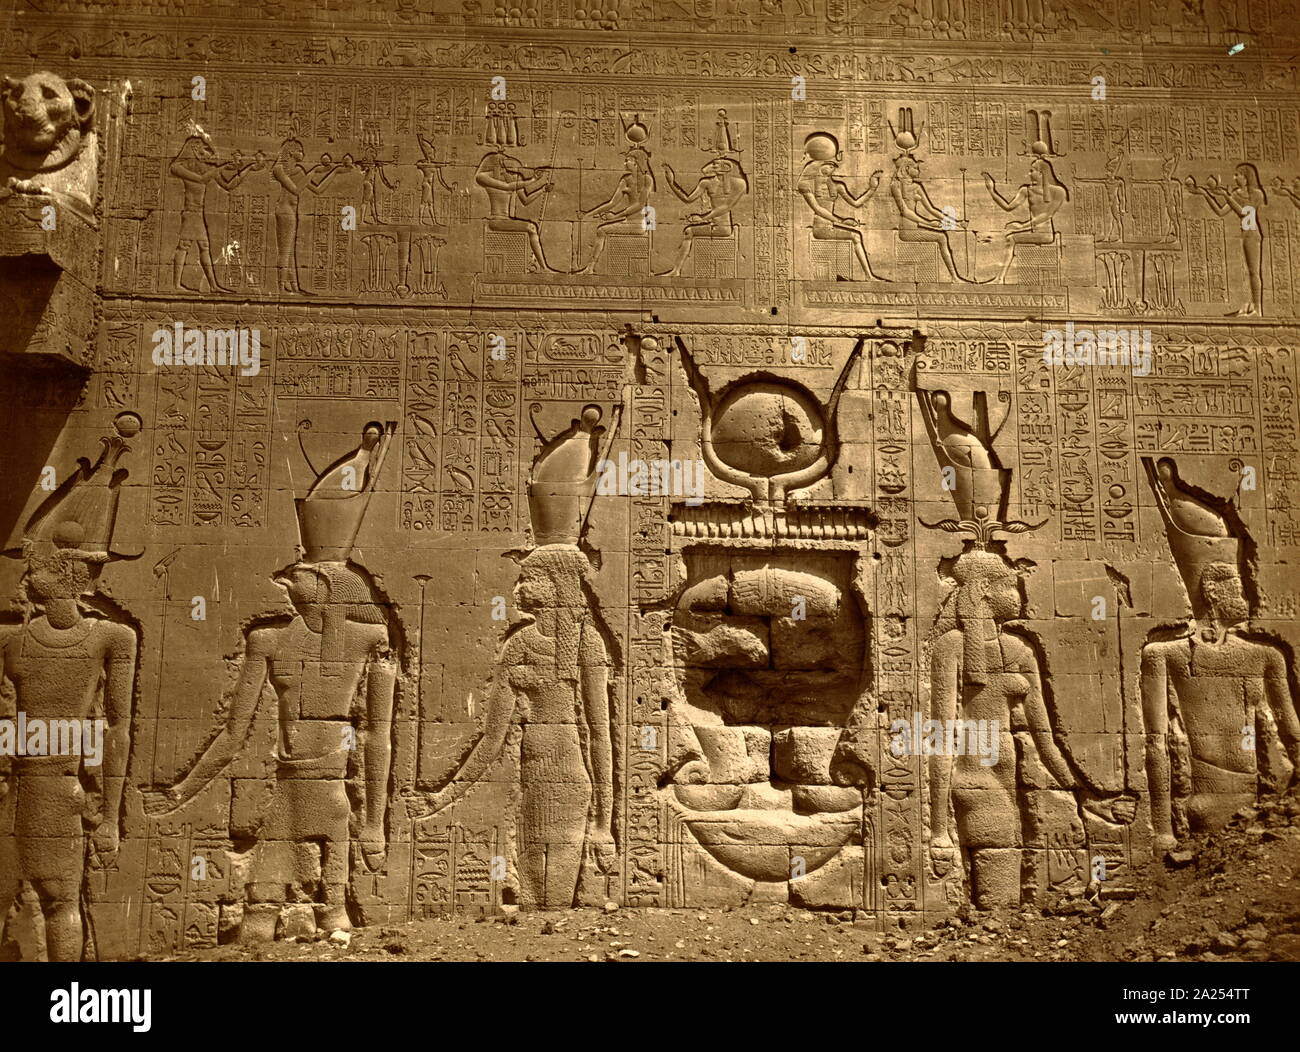 relief with hieroglyphics covers a wall in the Temple of Hathor, located in Dendera, Egypt. Dendera Temple complex. It is one of the best-preserved temple complexes in Egypt. The area was used as the sixth Nome of Upper Egypt, south of Abydos. Stock Photo